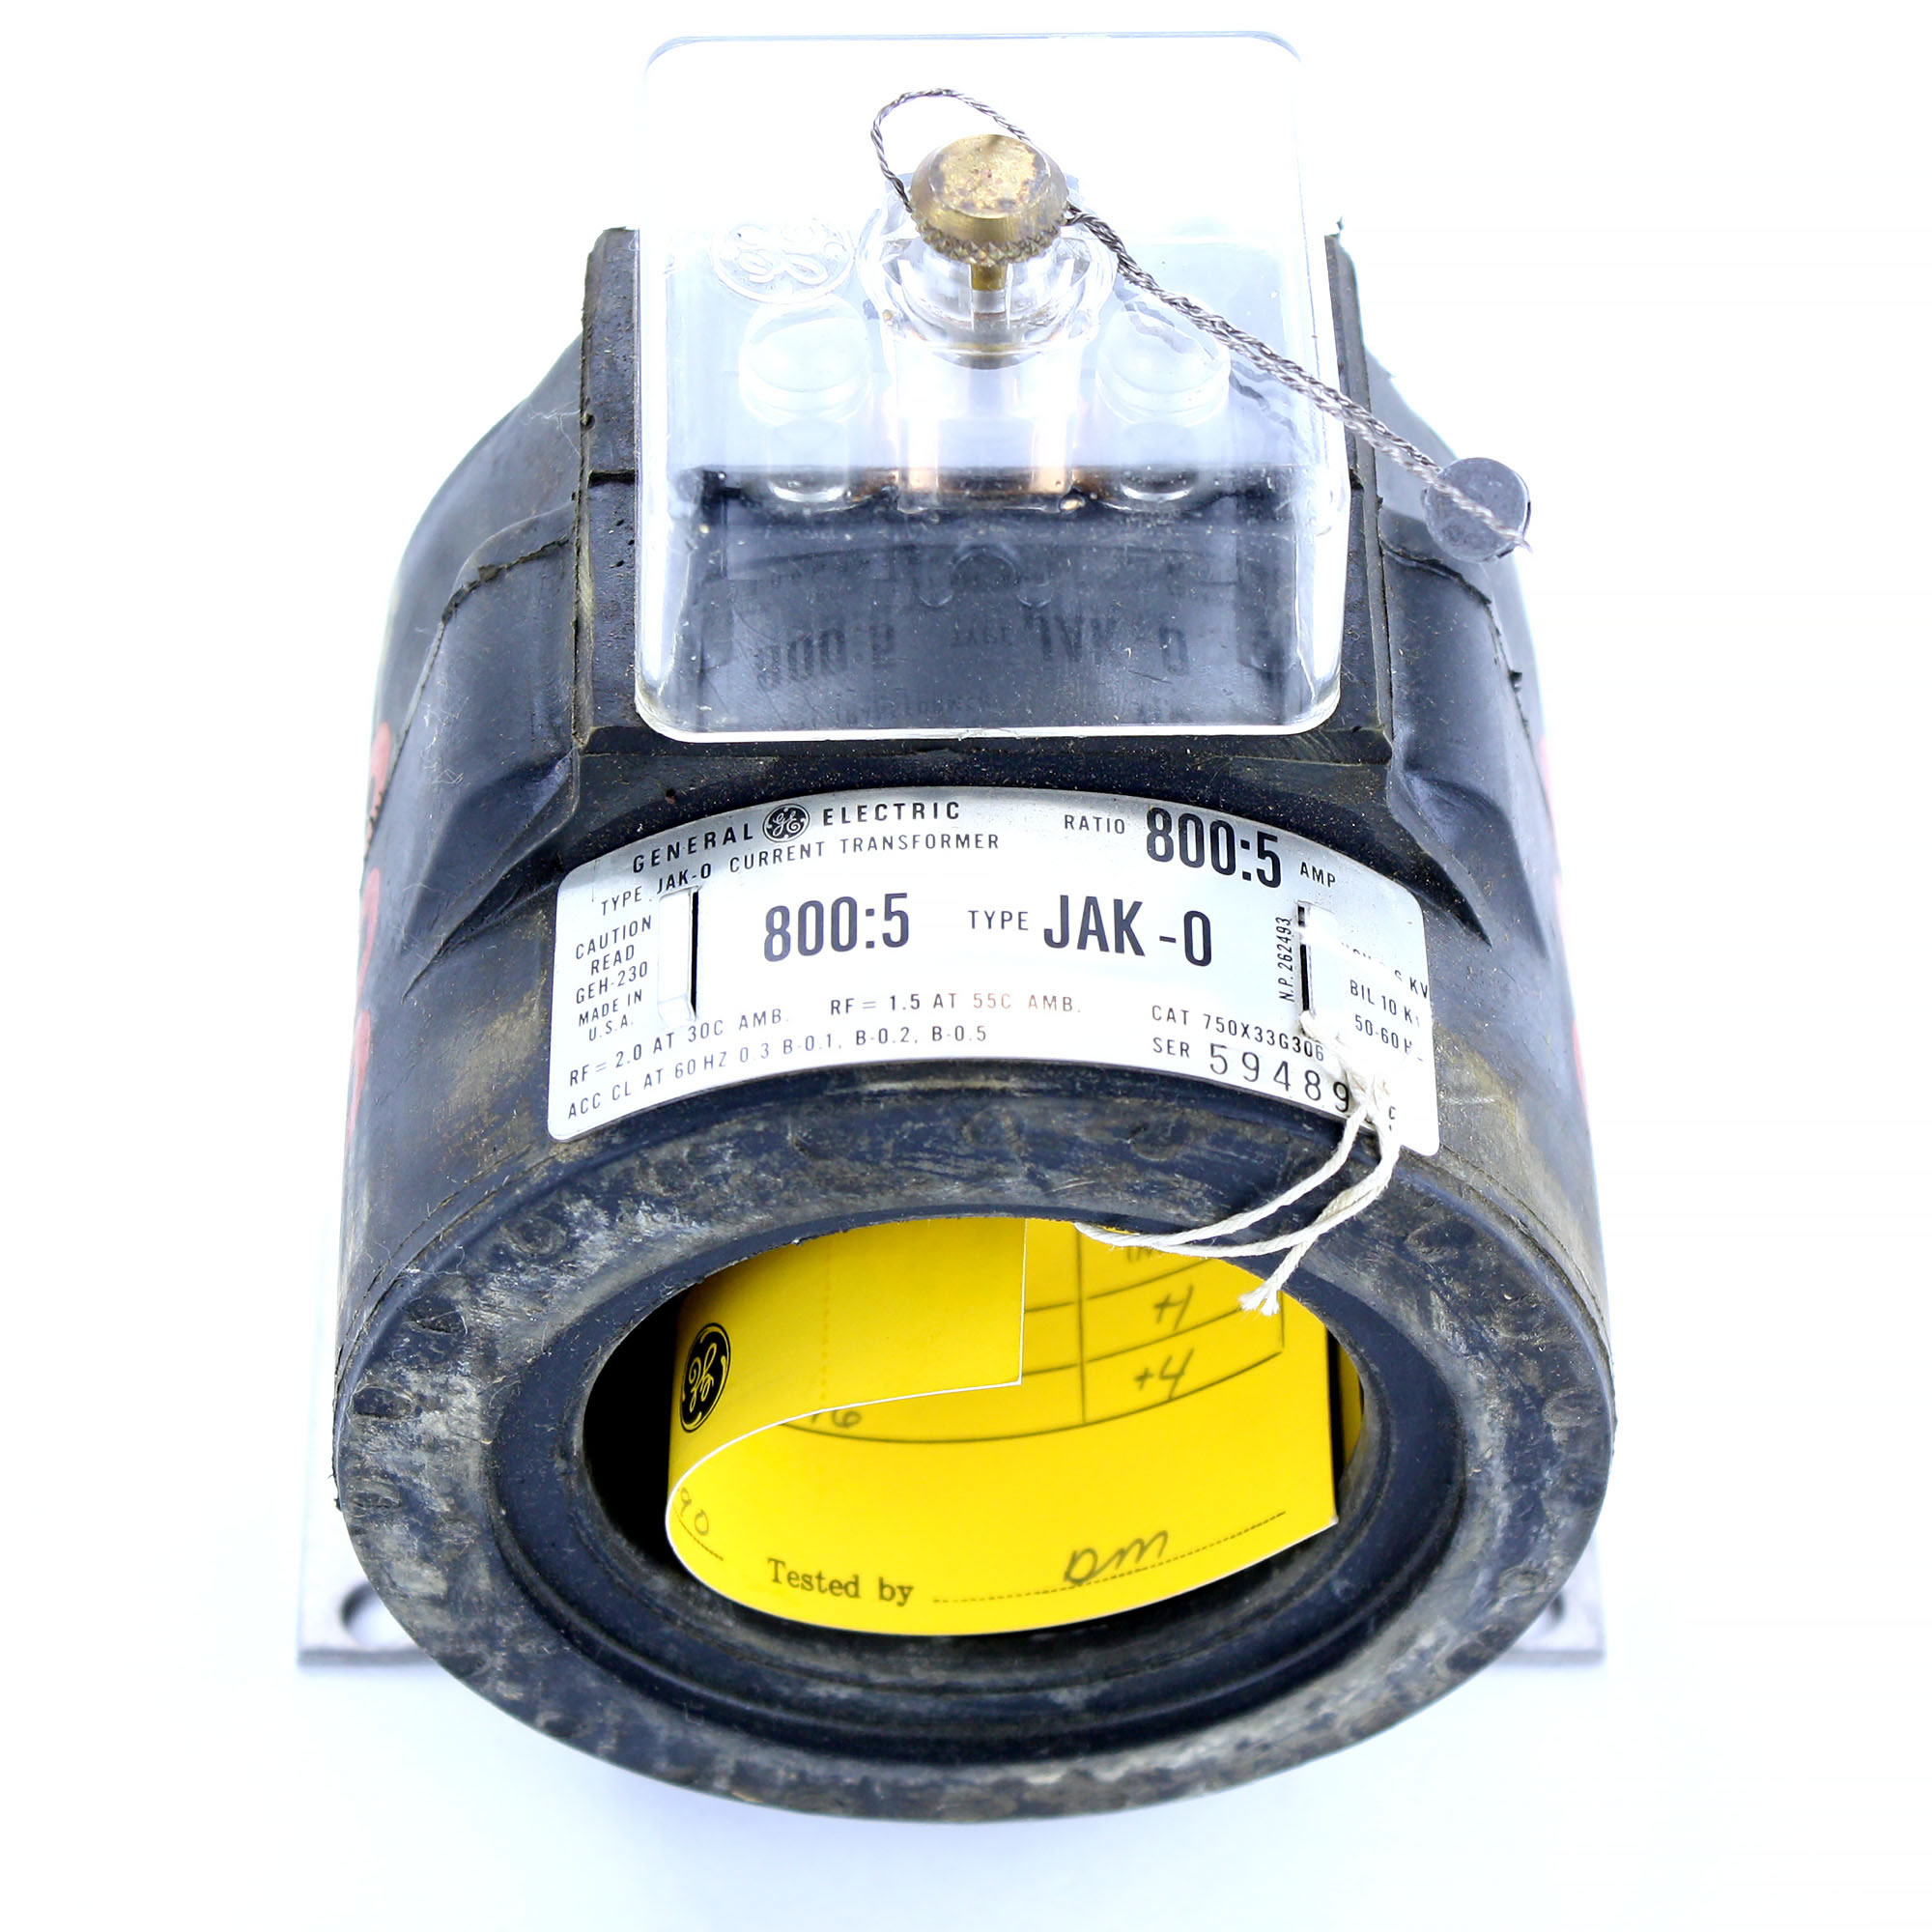 General Electric, Inc. GE 750X33G306 TYPE JAK-0 800:5 AMP CURRENT TRANSFORMER, CT, INSTRUMENT